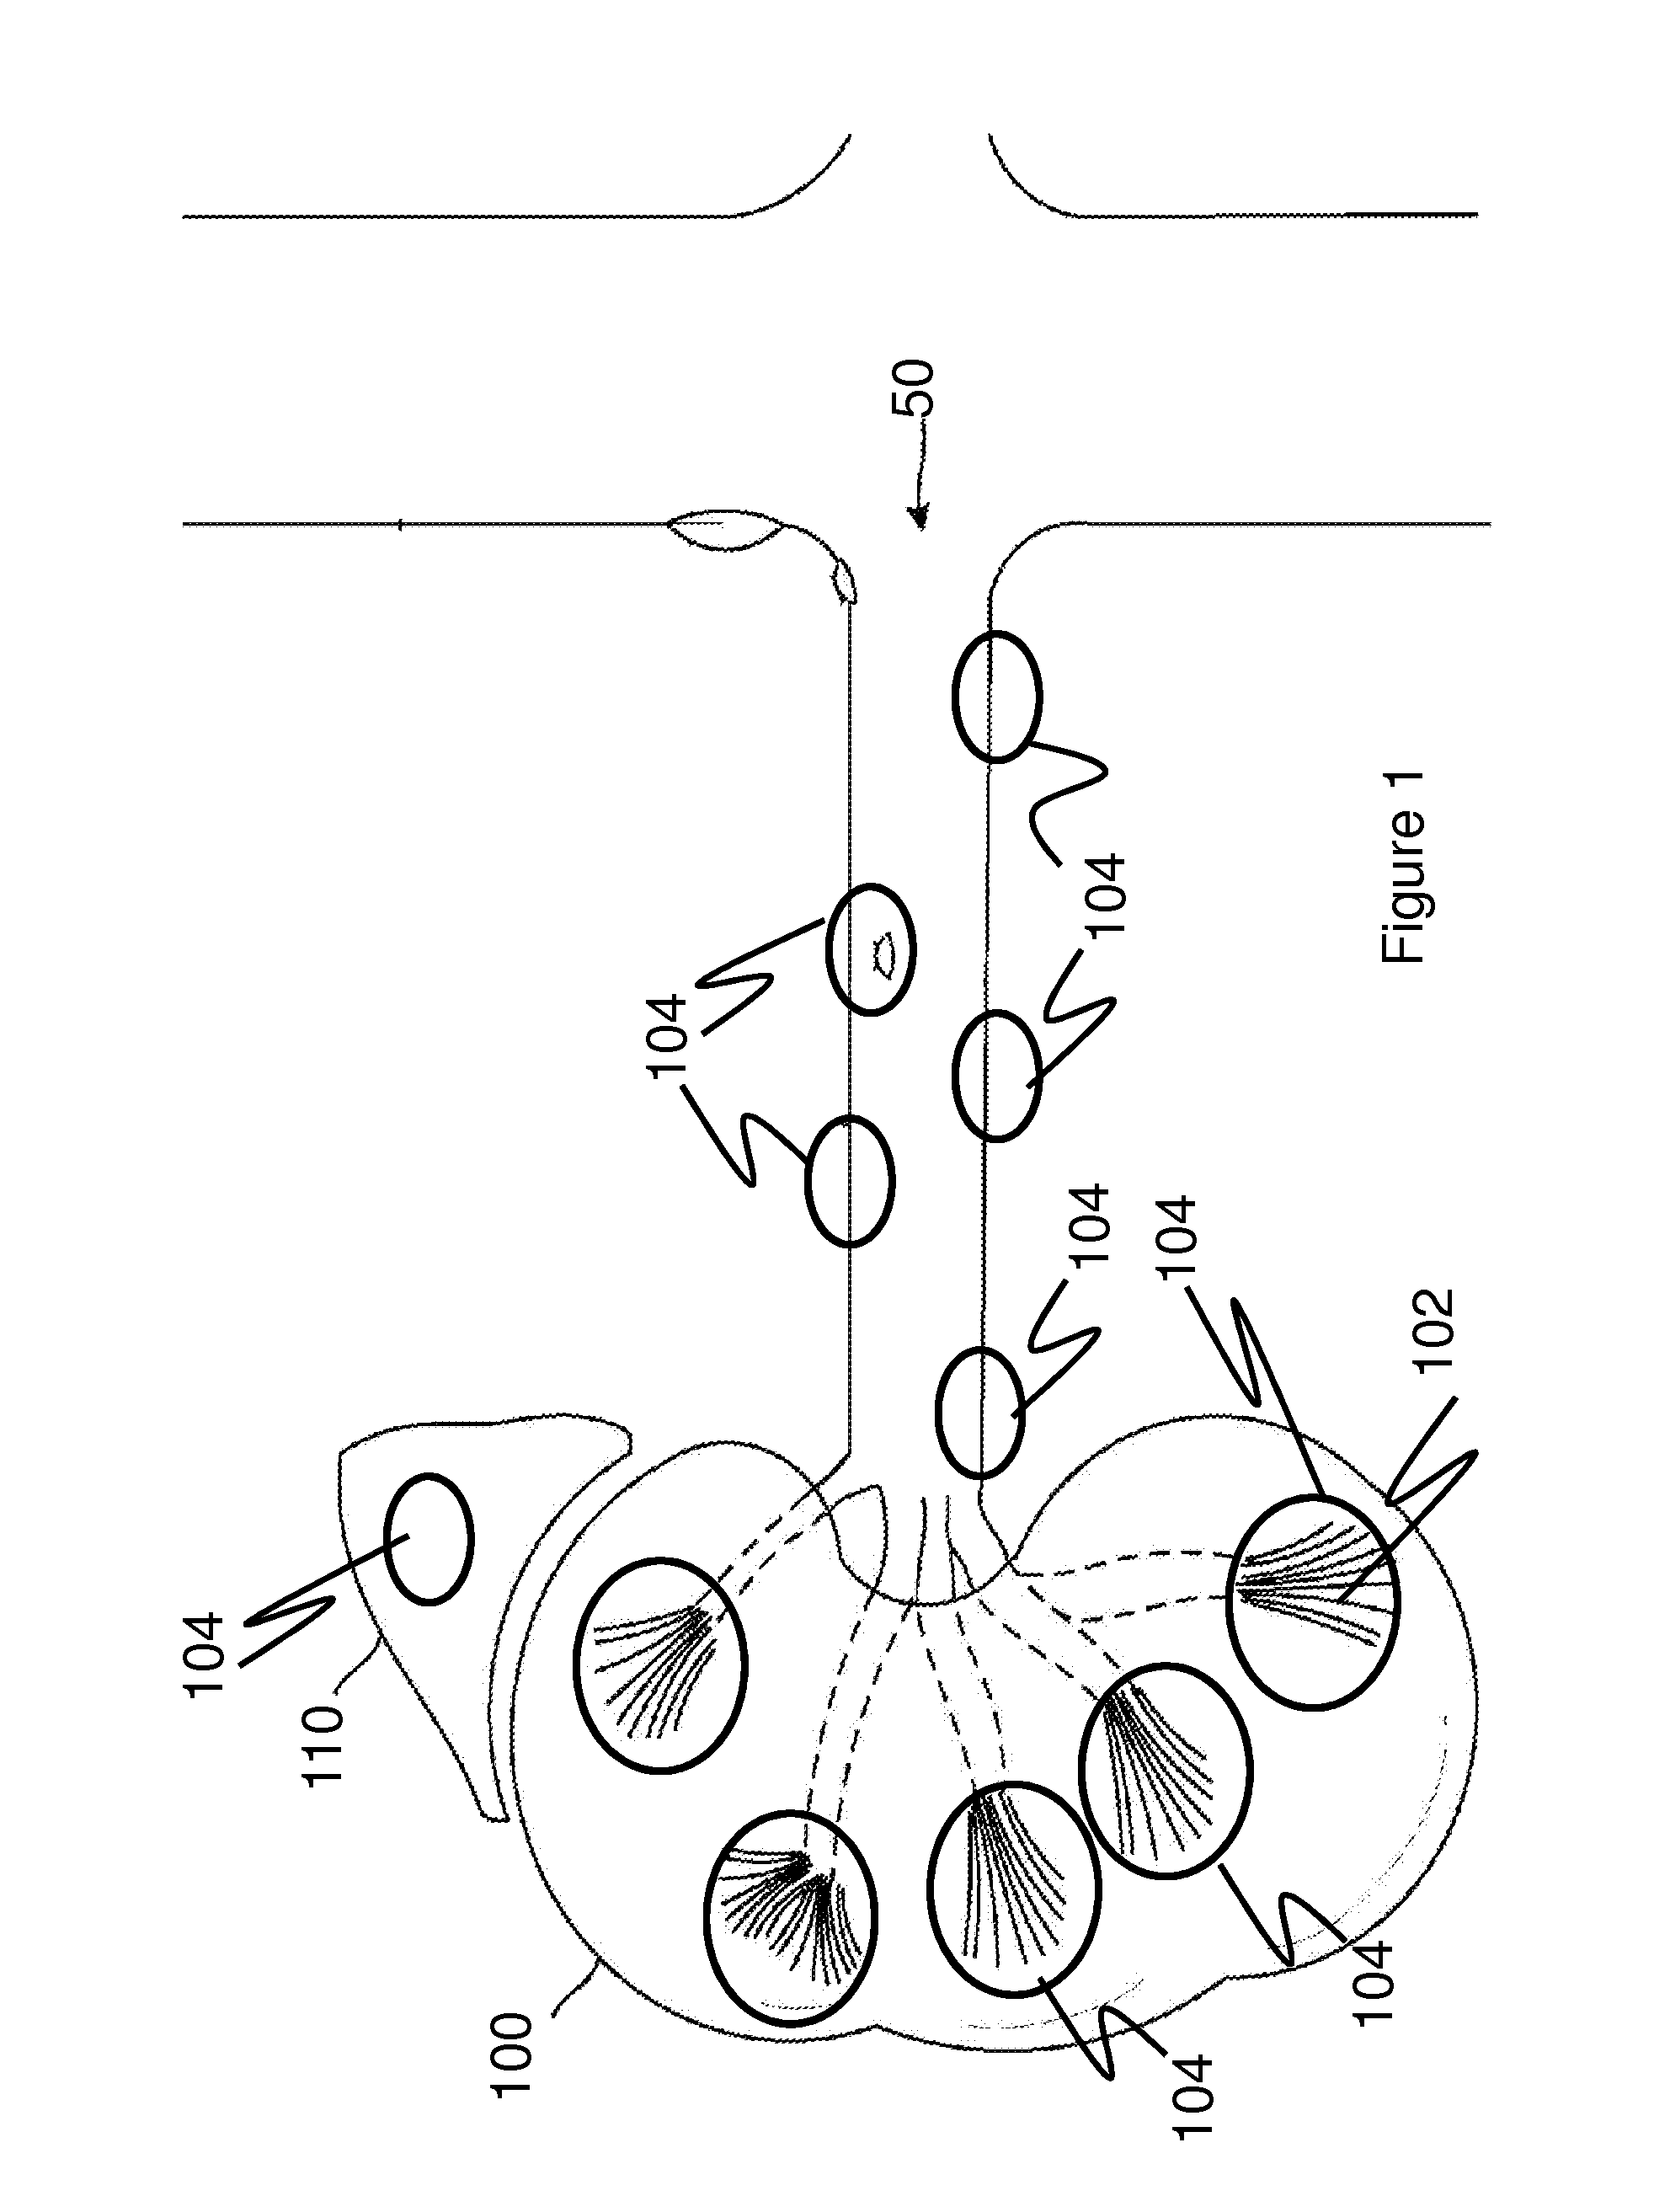 Method for imporoving kidney function with extracorporeal shockwaves